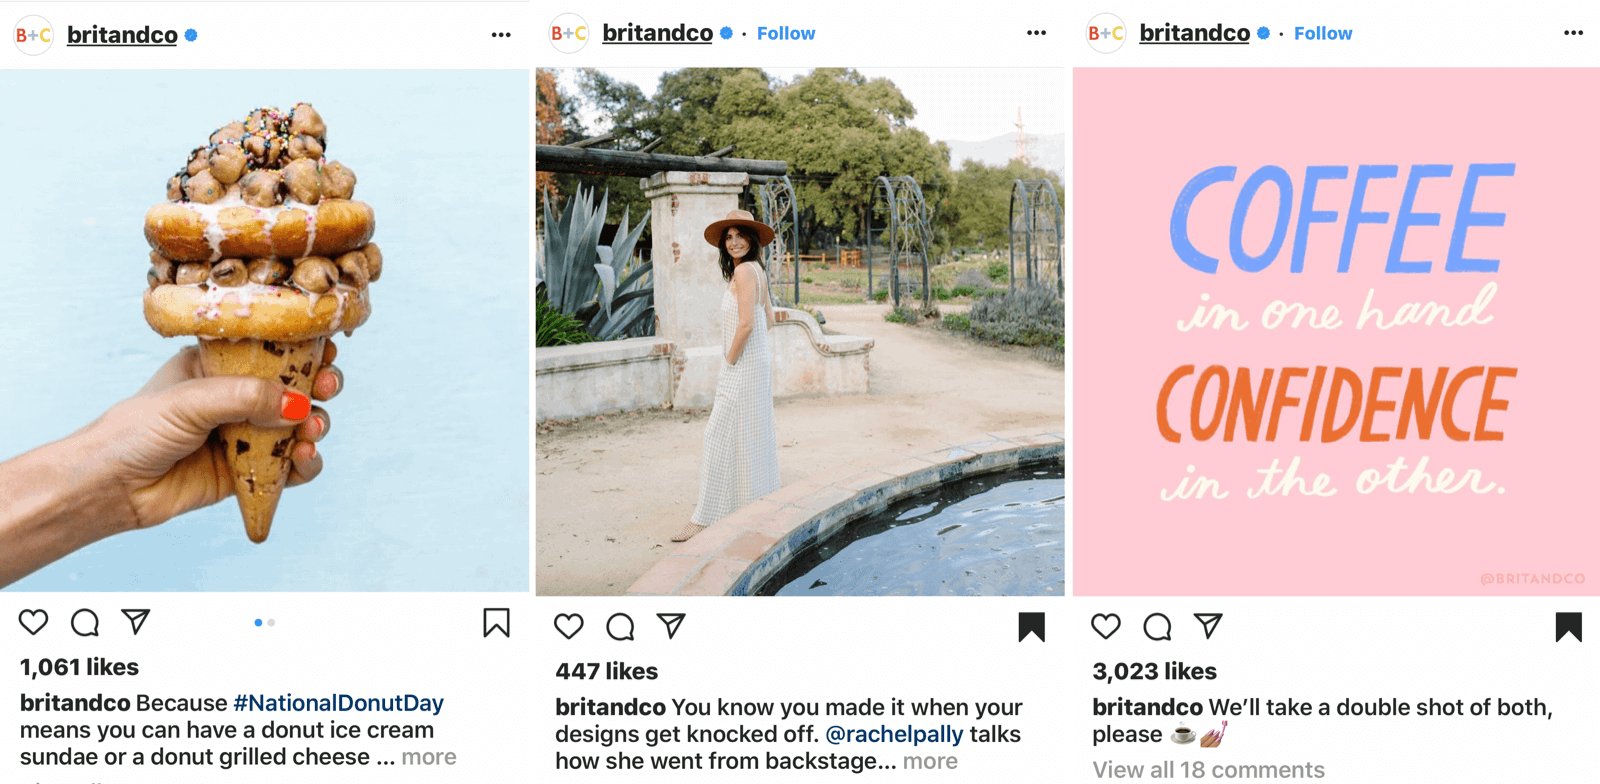 How to Get Many Followers Quickly on Instagram with Innovative and Effective Techniques